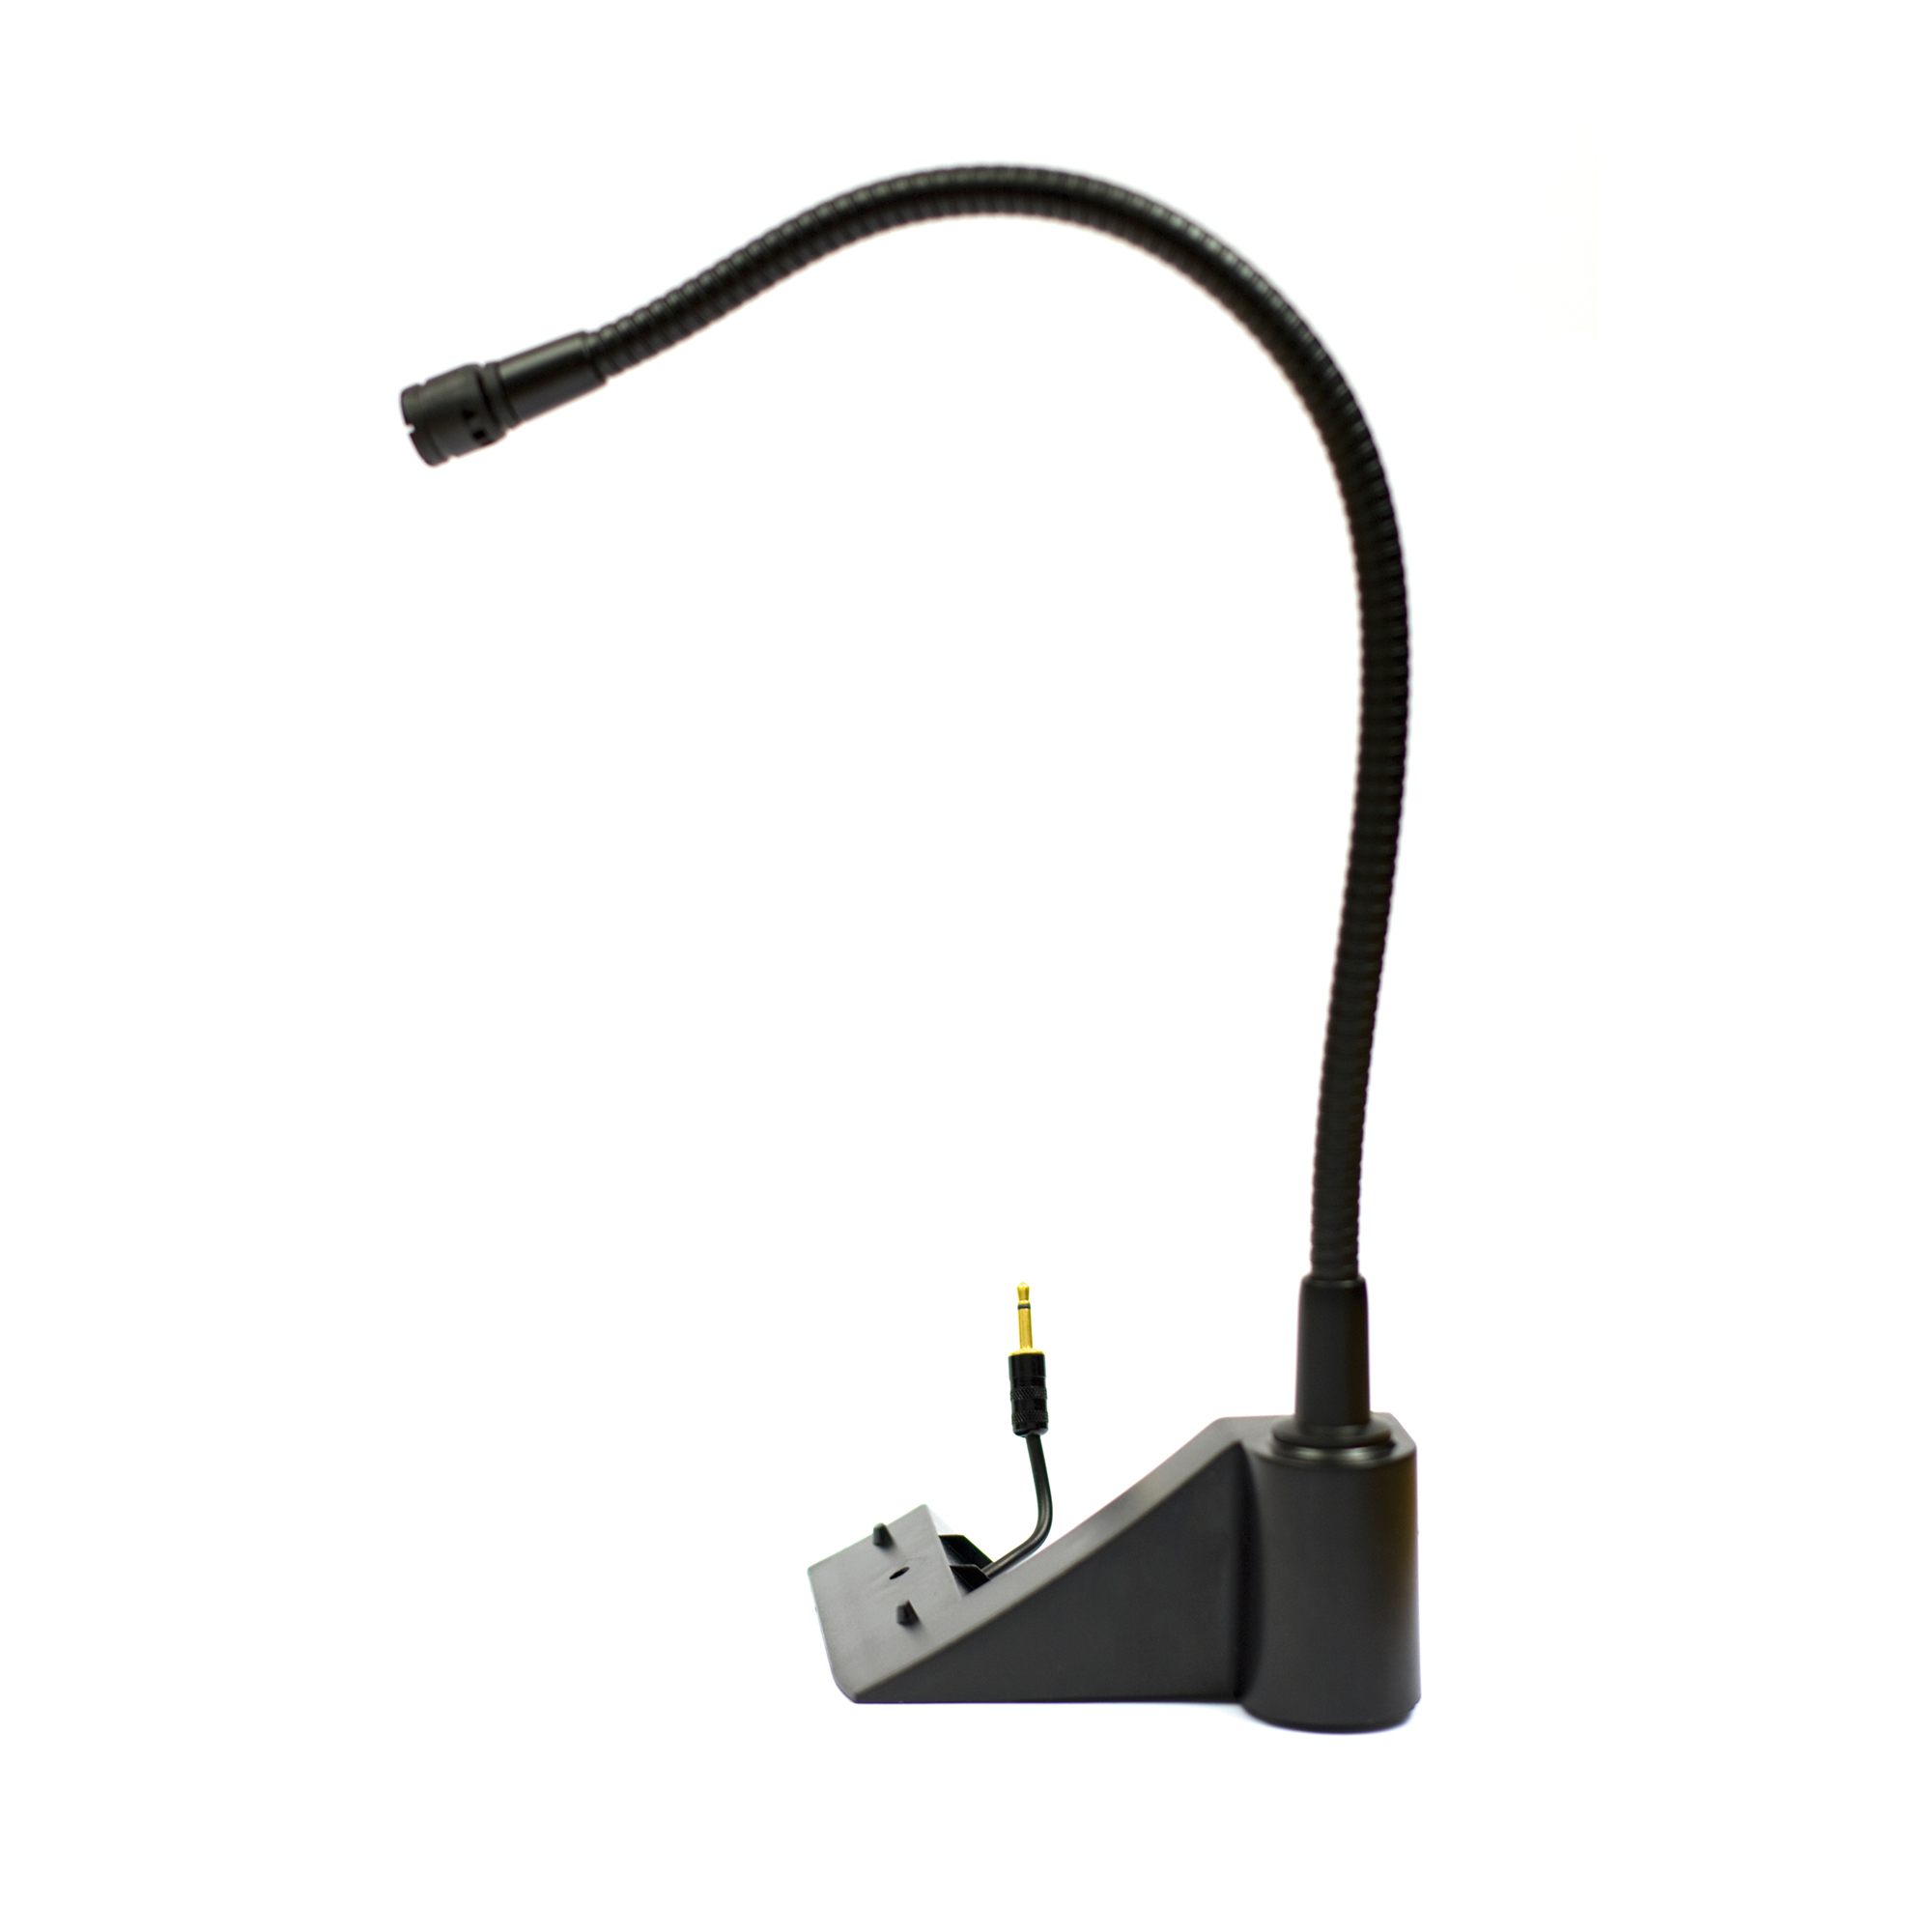 MDDS Microphone for Dual Display Station - 1007007010